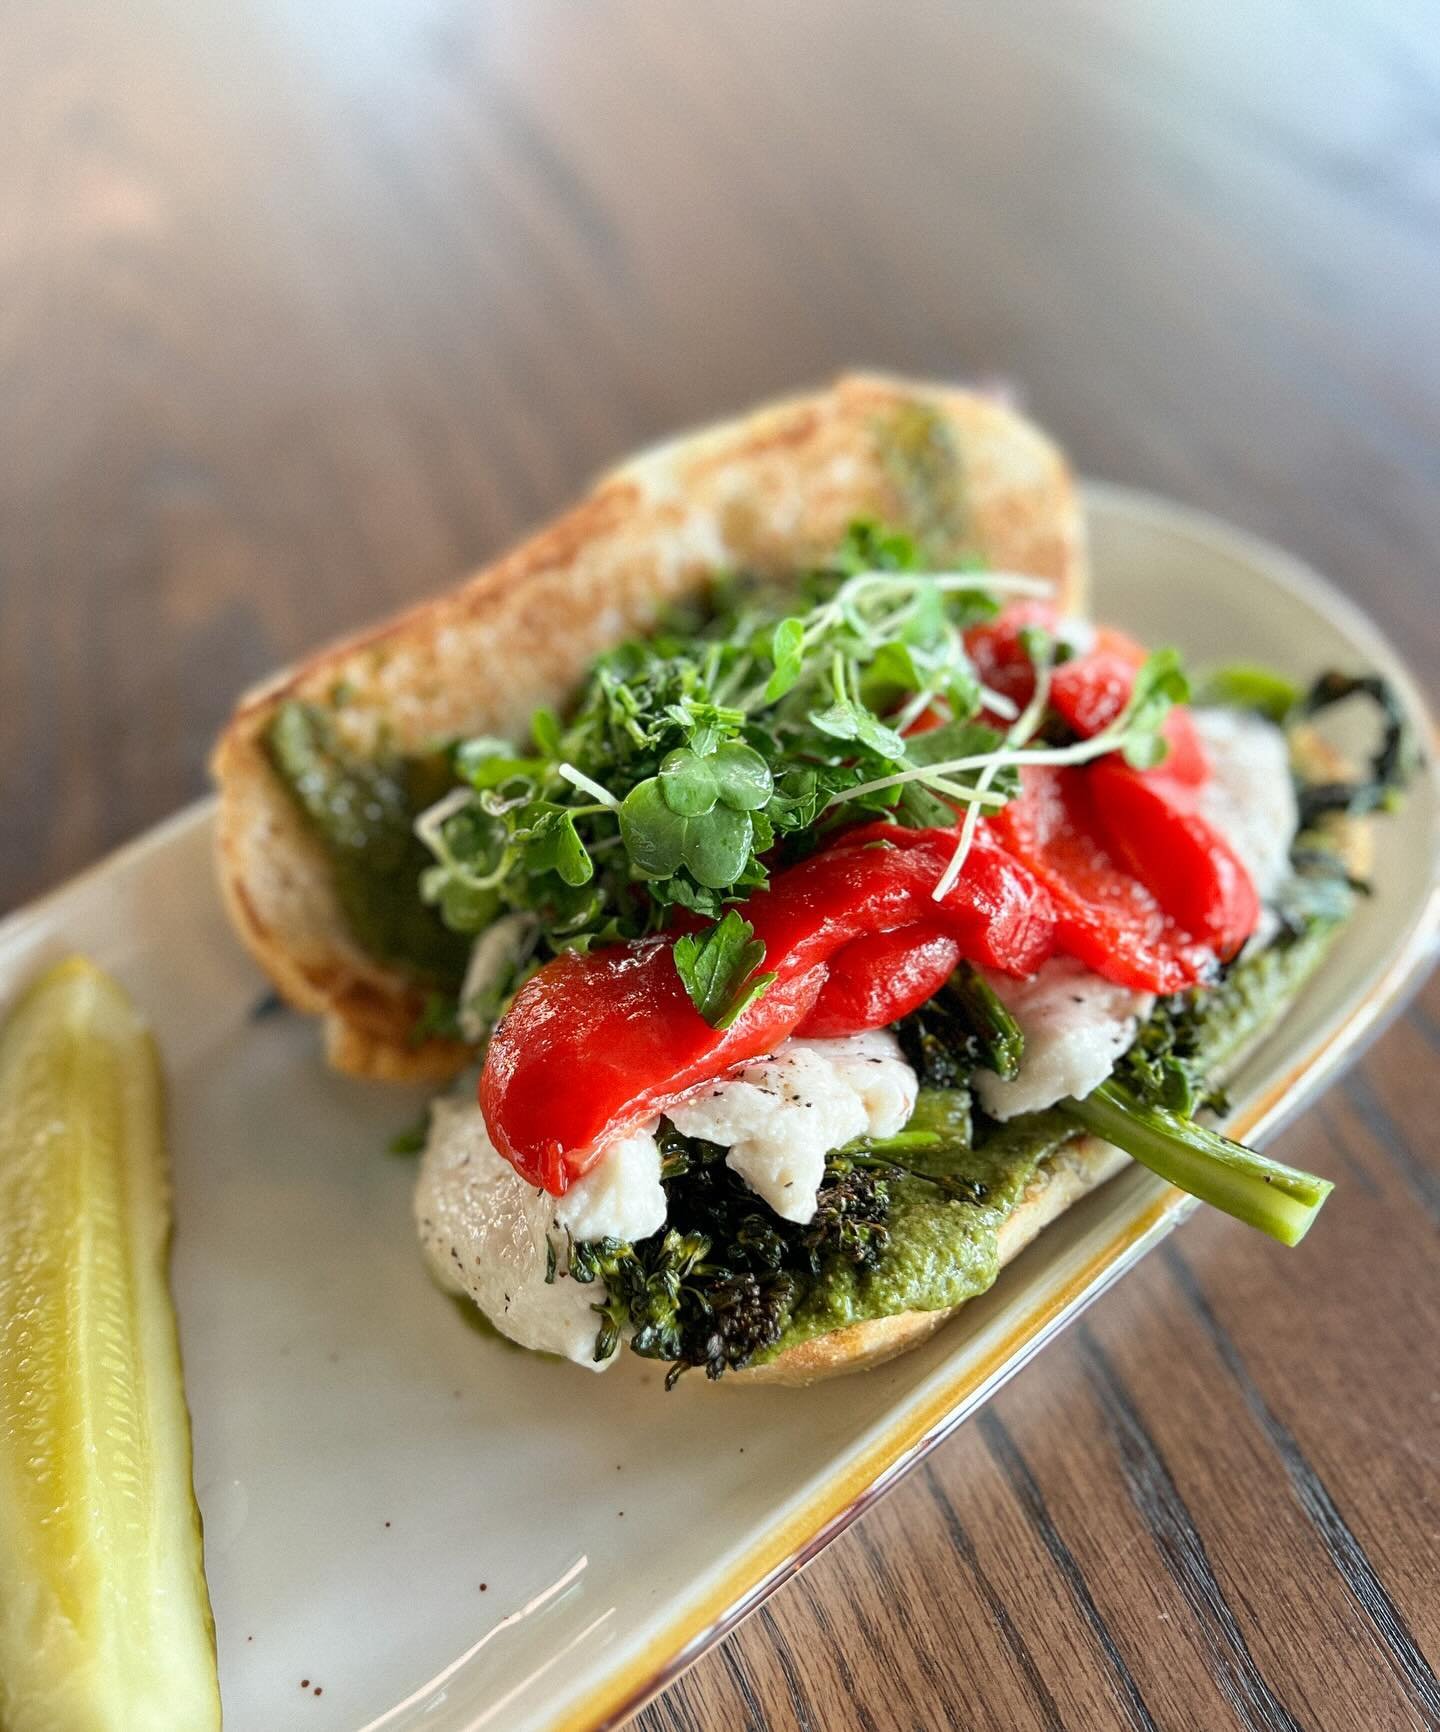 🥦 ROASTED BROCCOLINI HOAGIE
Pistachio walnut pesto, cashew mozzarella, roasted red pepper, lemon &amp; herbs

You can make it gf by substituting hoagie with wild rice &amp; quinoa! 

Served every Tuesday- Friday for lunch!